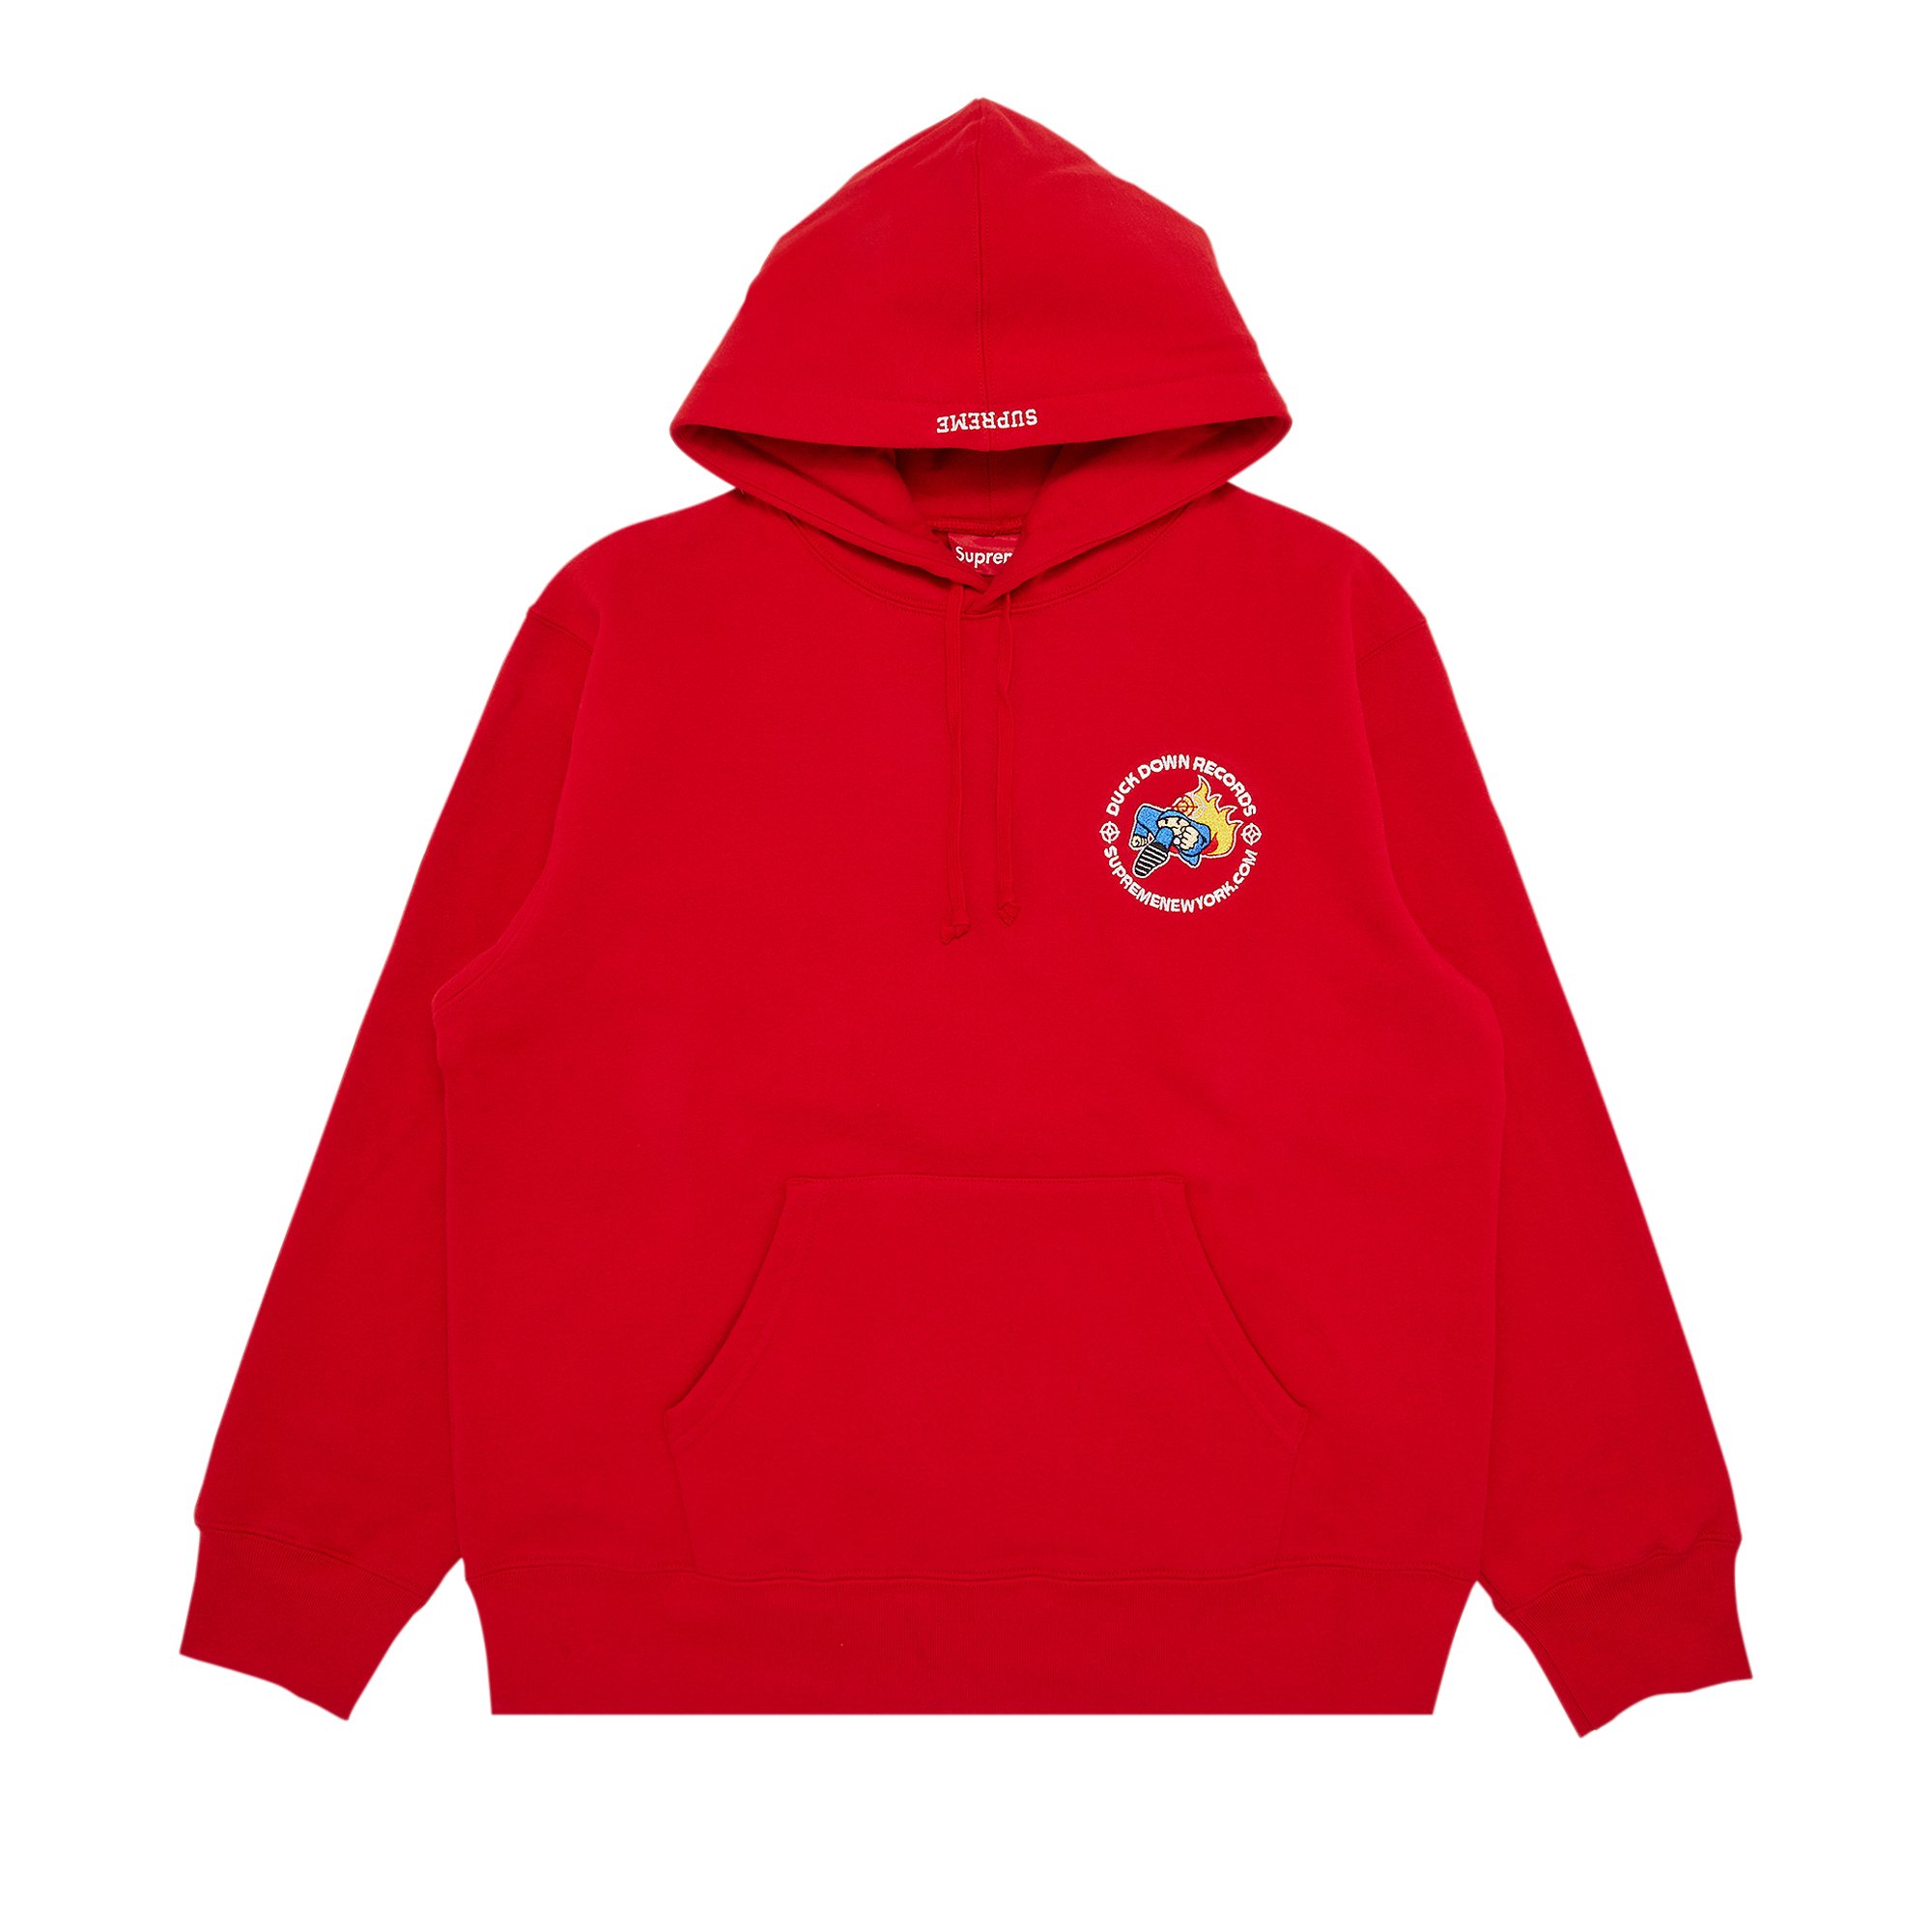 Buy Supreme x Duck Down Records Hooded Sweatshirt 'Red' - FW22SW76